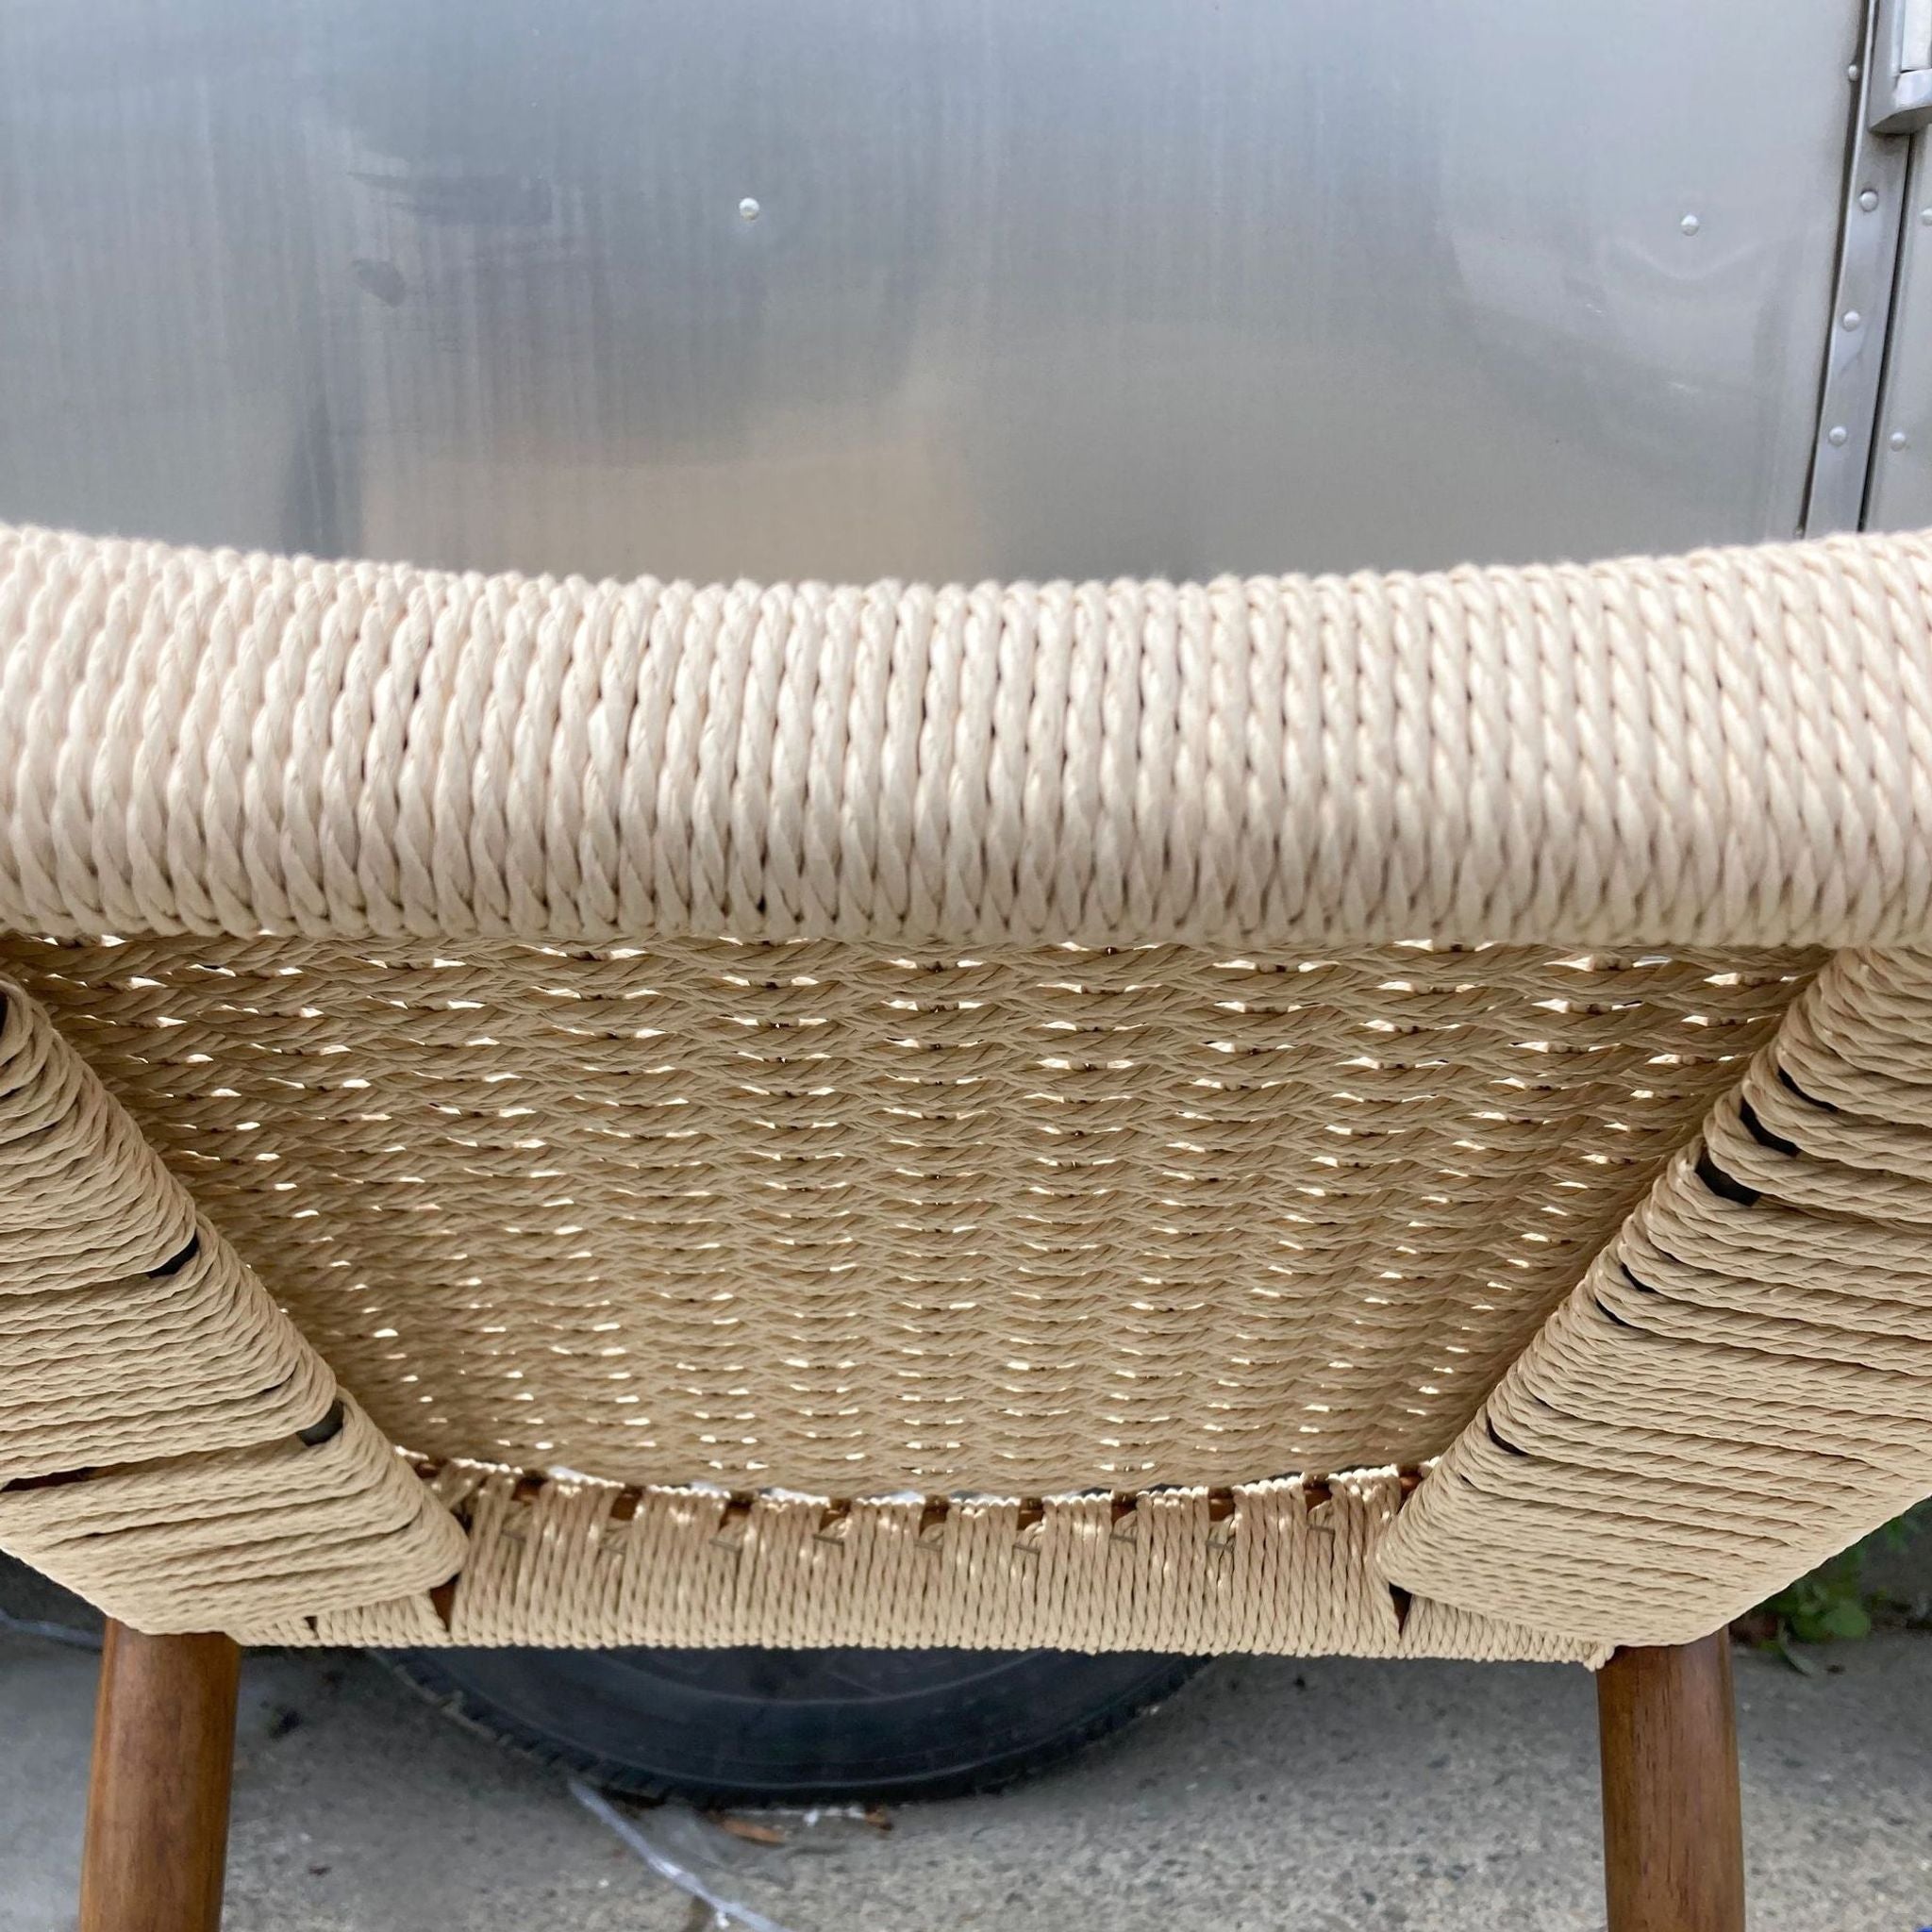 Close-up of West Elm Holland dining chair's seat, highlighting the intricately woven durable cording design and chair's wooden frame.